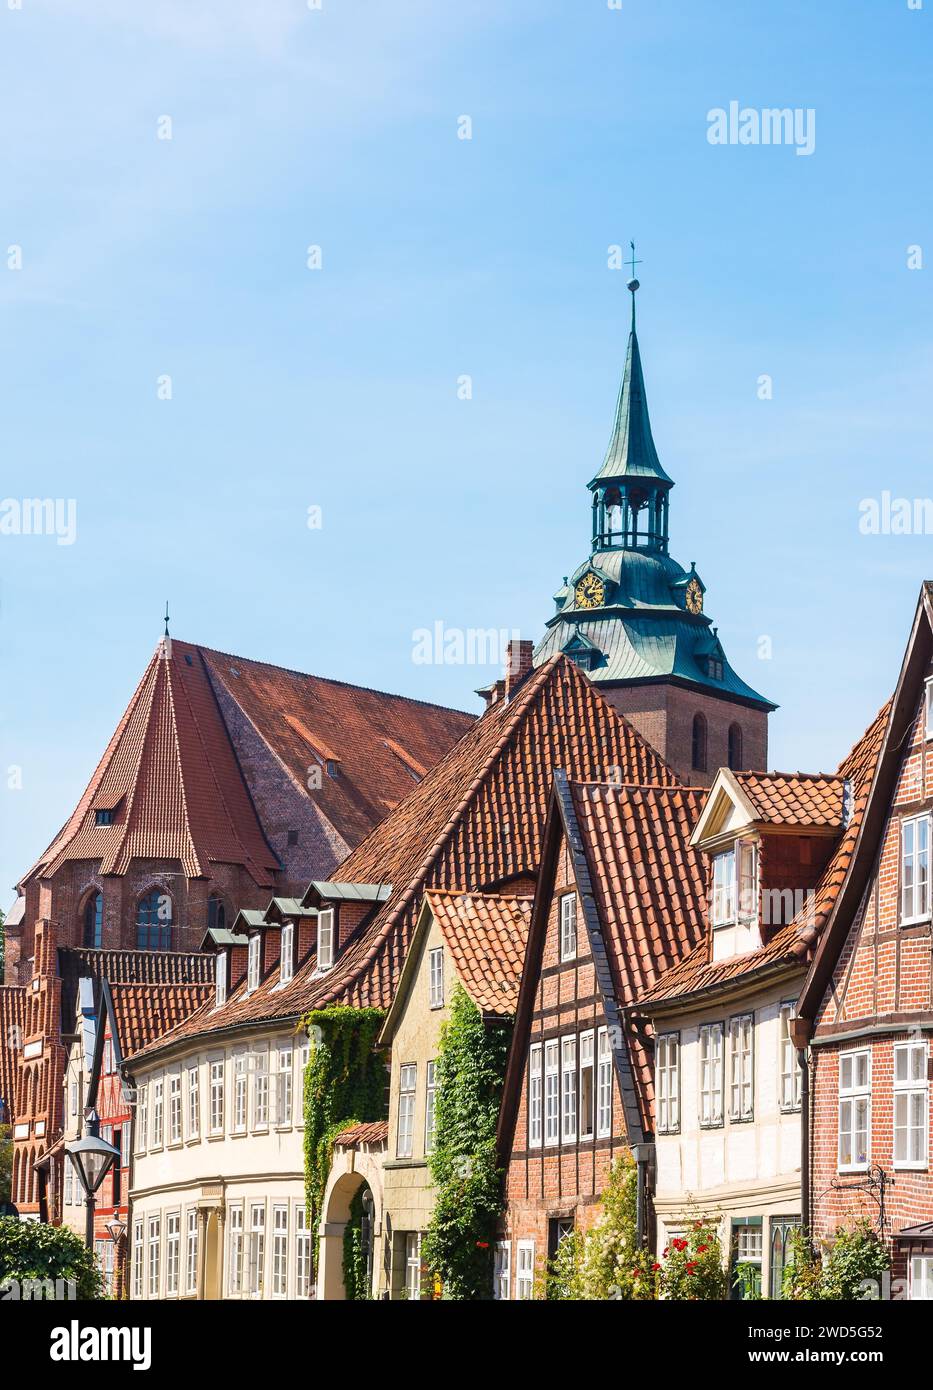 Historic town houses in the street 'Auf dem Meere', in the background the Michaeliskirche, Painter's view of the old town of the Hanseatic city of Stock Photo